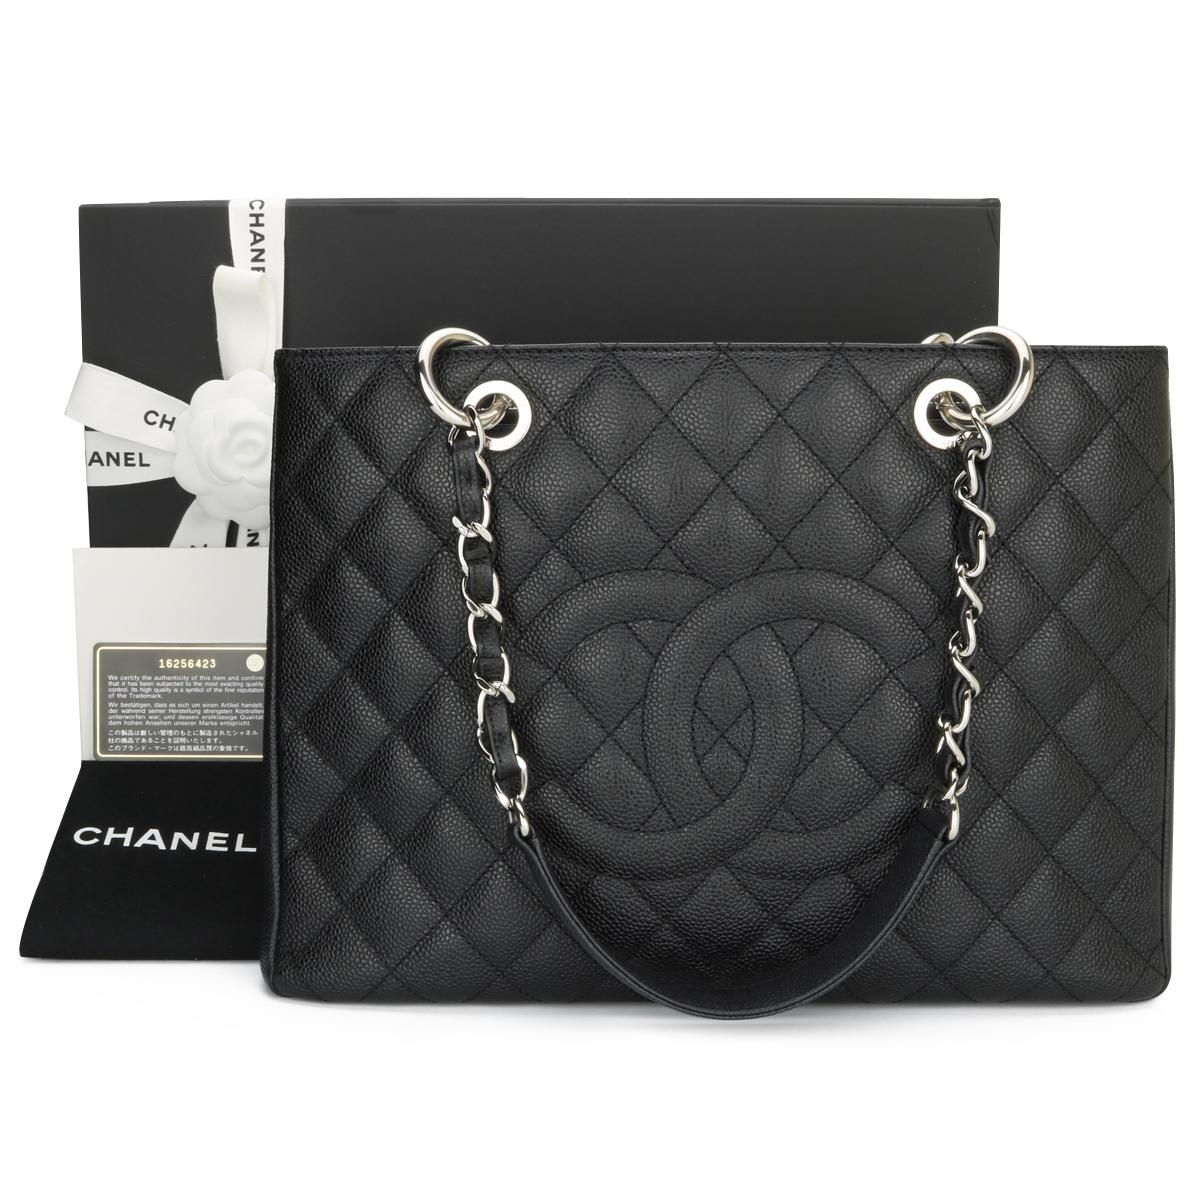 CHANEL Grand Shopping Tote (GST) Black Caviar with Silver Hardware 2012.

This bag is in excellent-mint condition, the bag still holds its original shape, and the hardware is still very shiny.

As Chanel has discontinued the Grand Shopping Tote